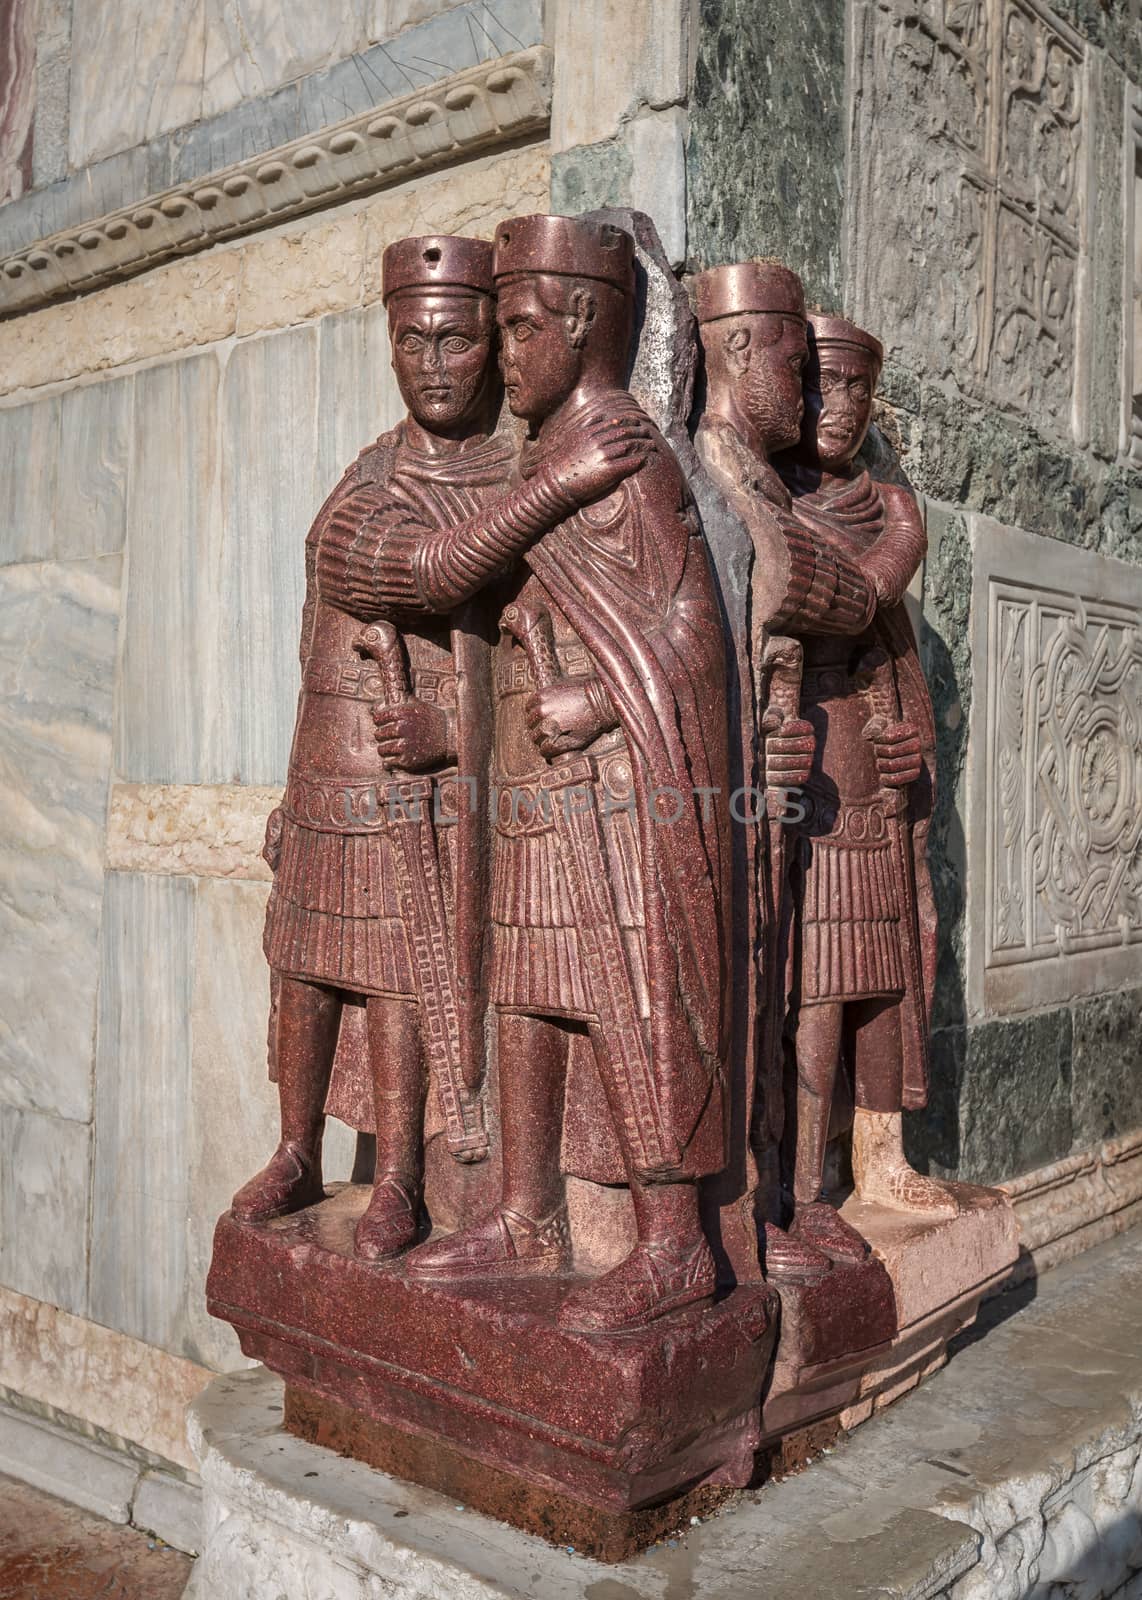 The Tetrarchs - a Porphyry Sculpture of four Roman Emperors, Sacked from the Byzantine Palace in 1204. Now located on San Marco Square in Venice, Italy